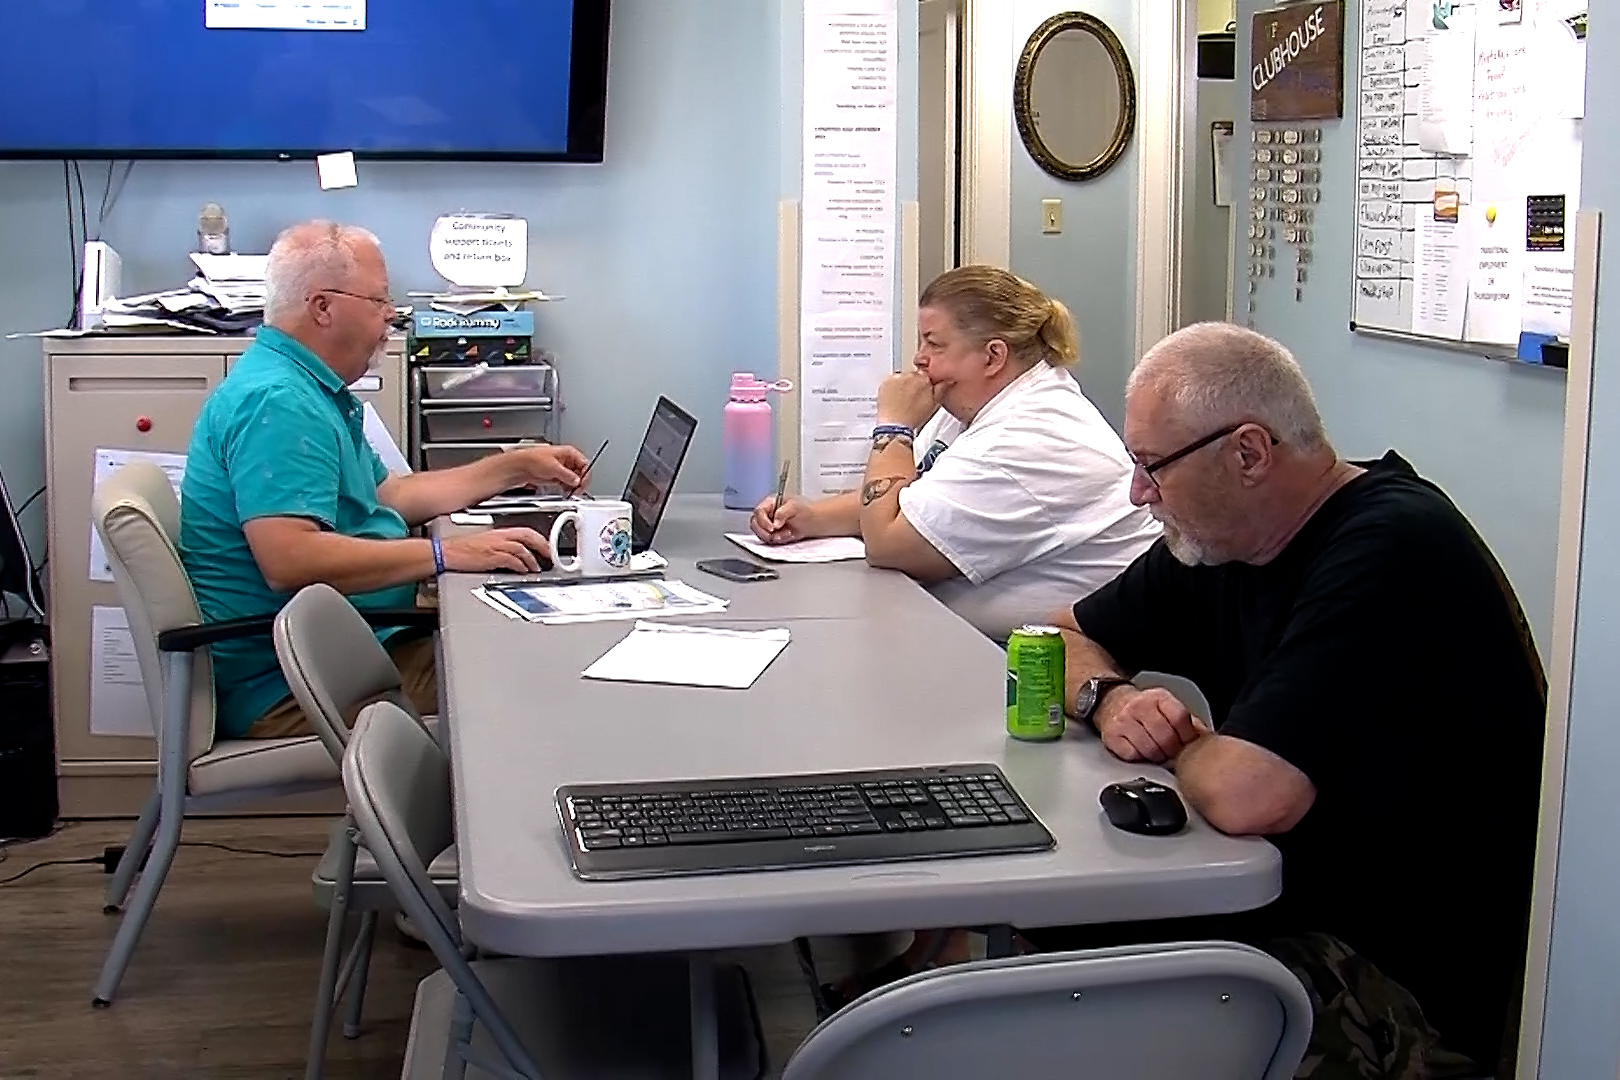 Dave Engstrom, left, works with members of the Wabash Valley Friendship Clubhouse